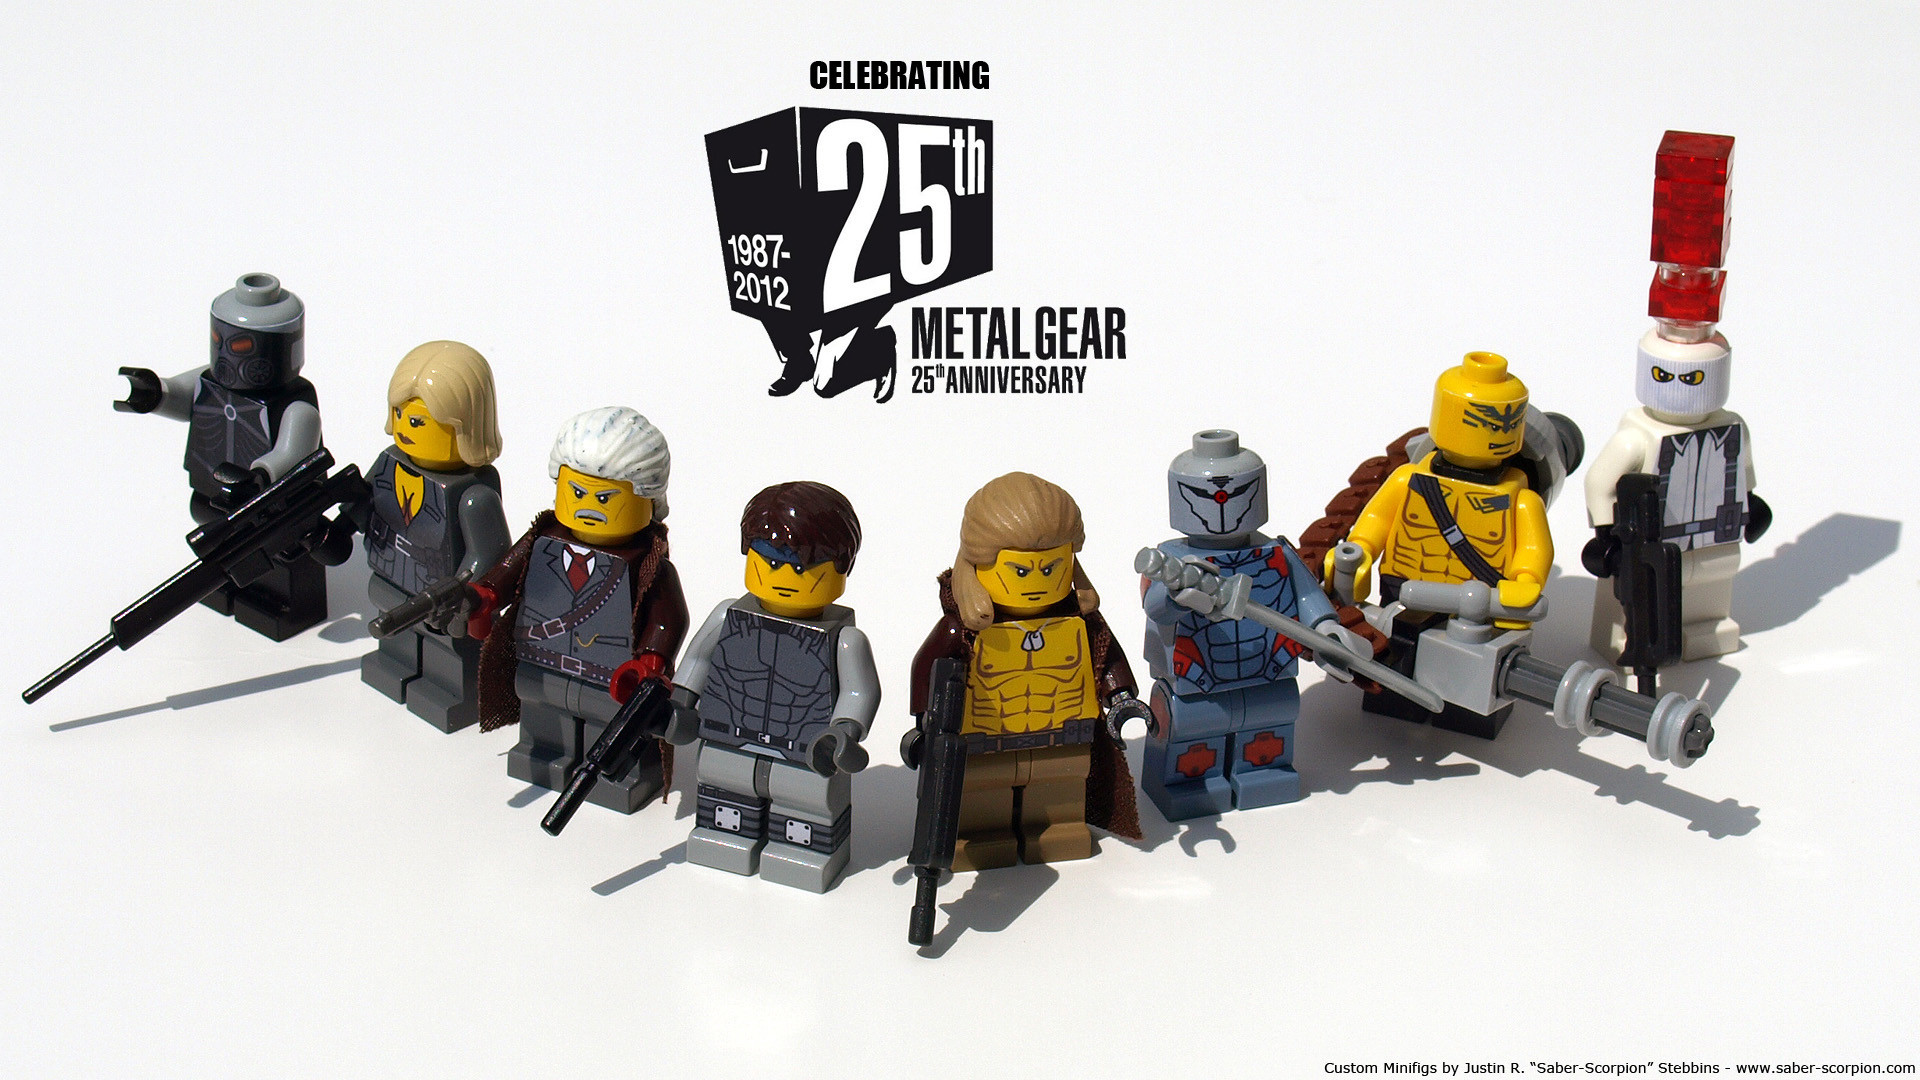 1920x1080 ... wallpaper-sized version of the above image in 1920 x 1080. Happy  anniversary, Metal Gear ...